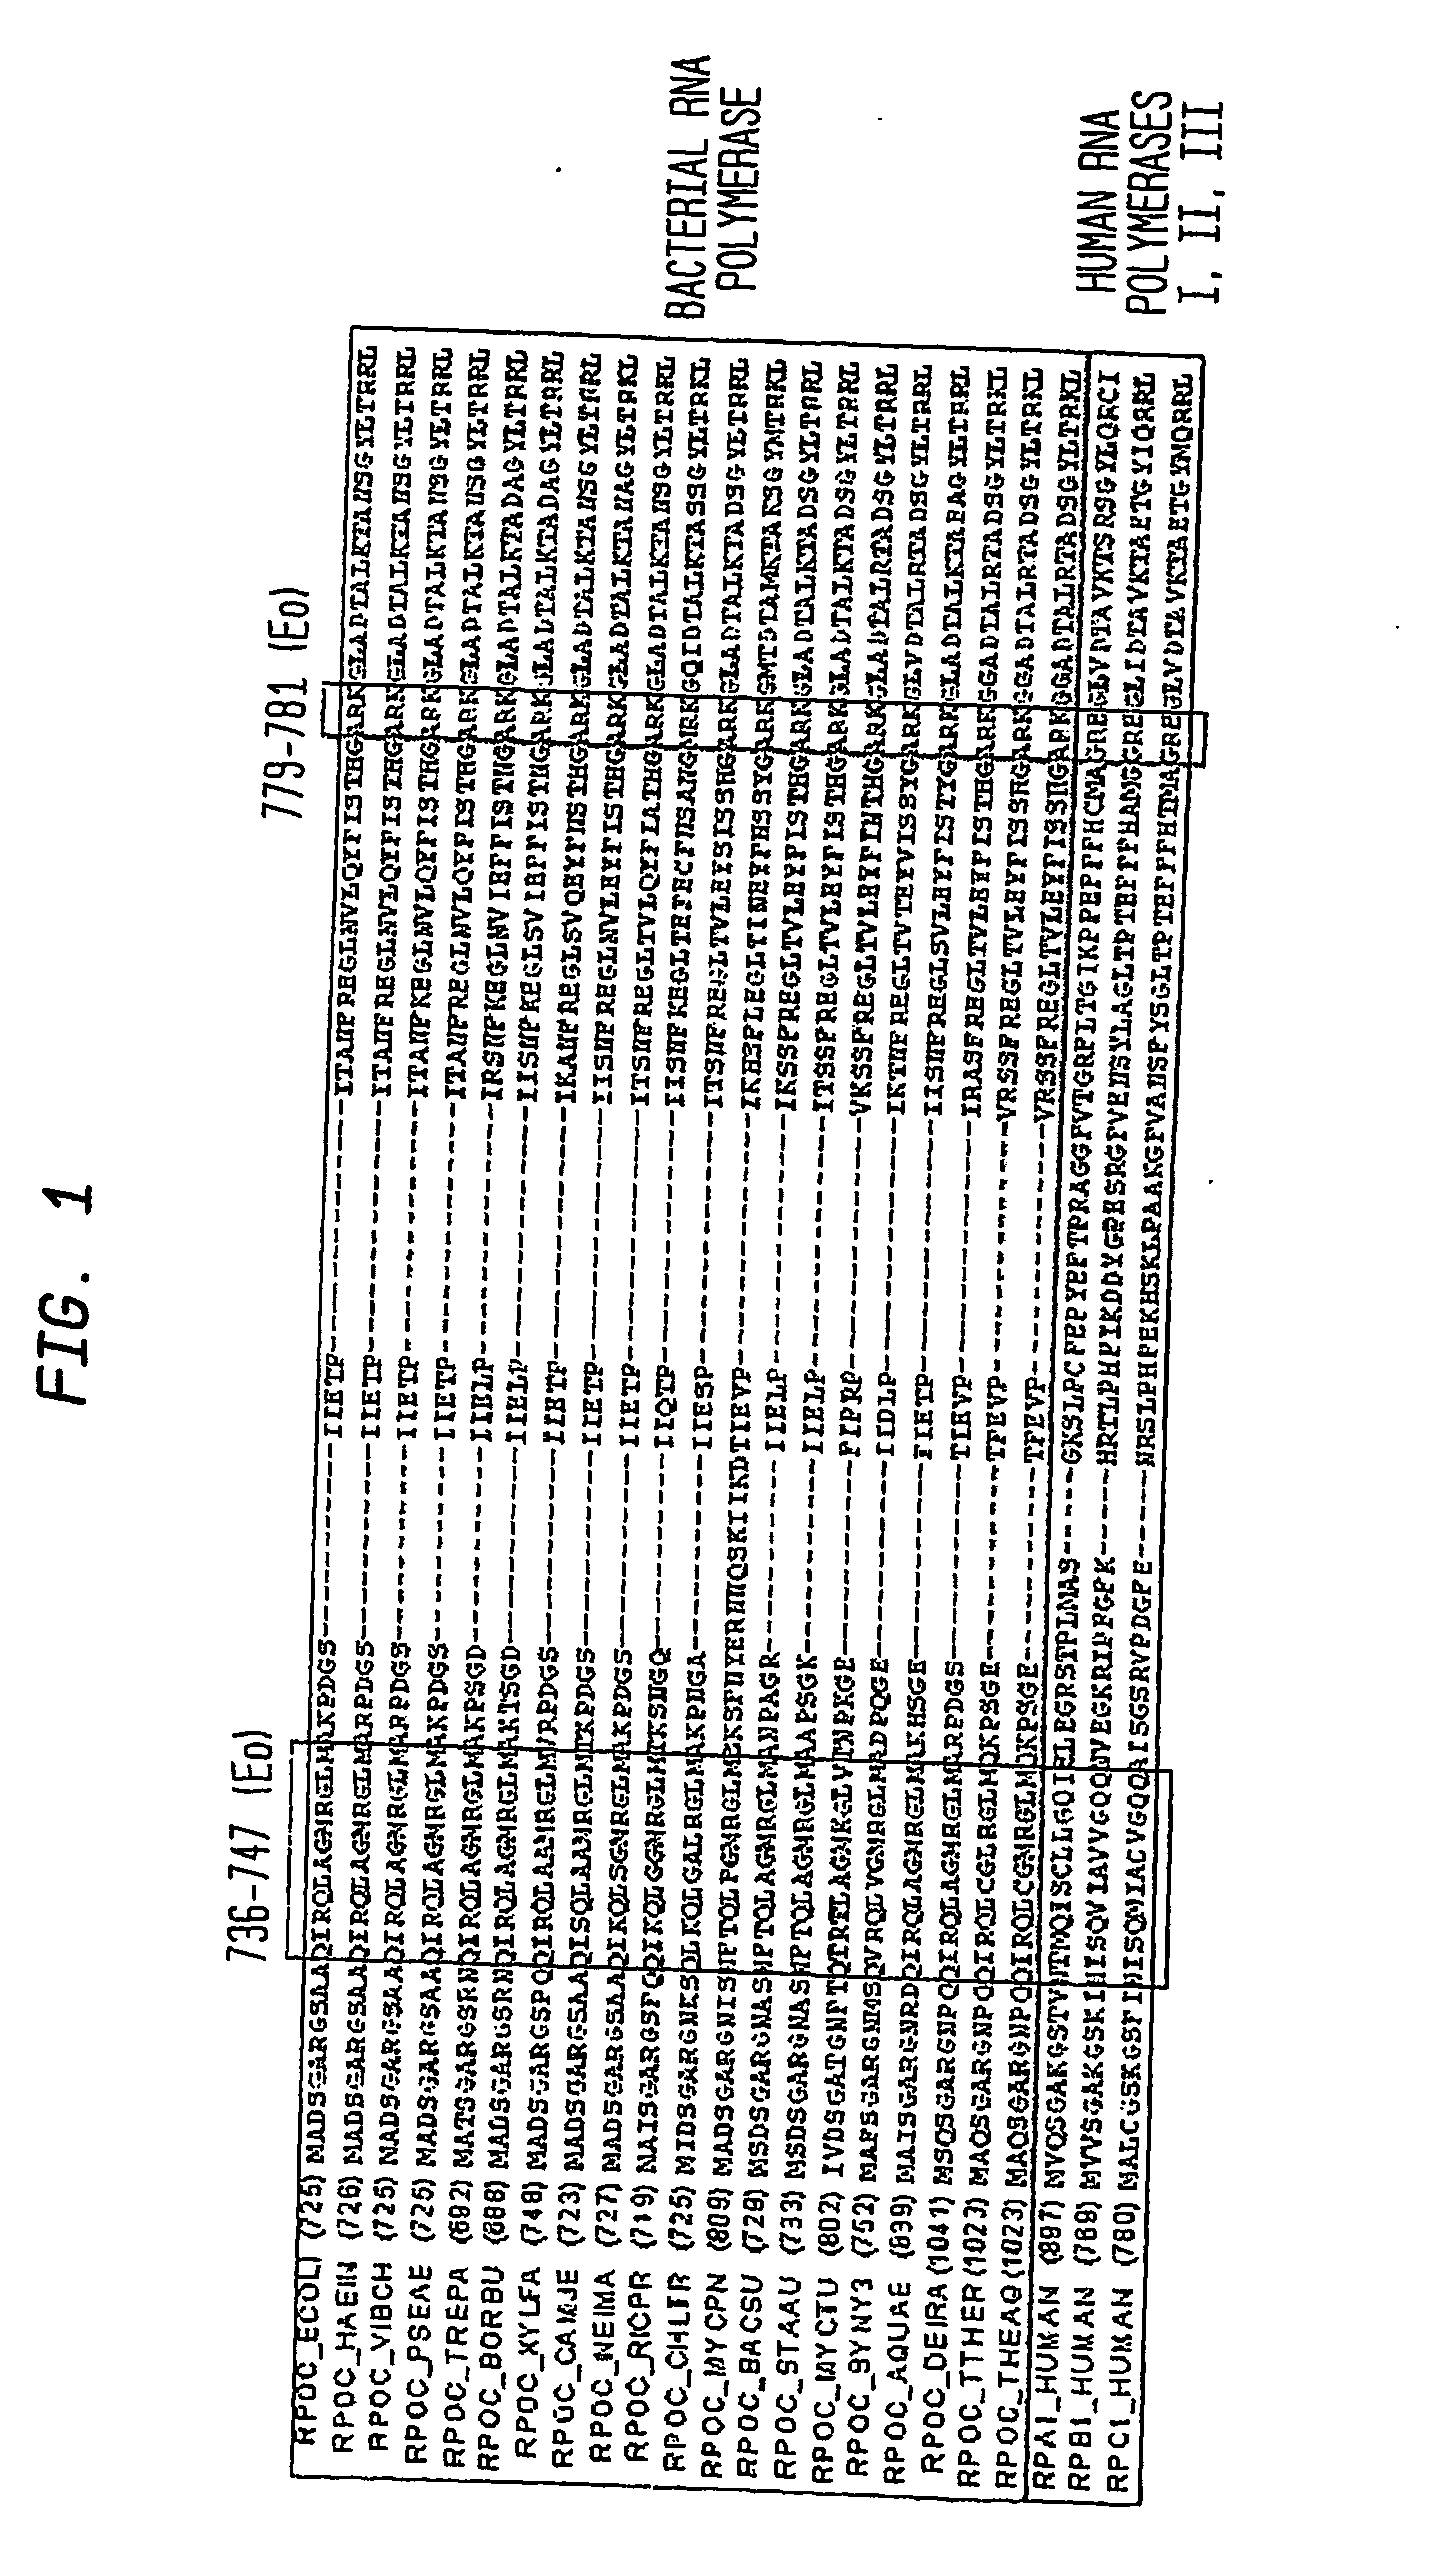 Target and method for inhibition of bacterial rna polymerase